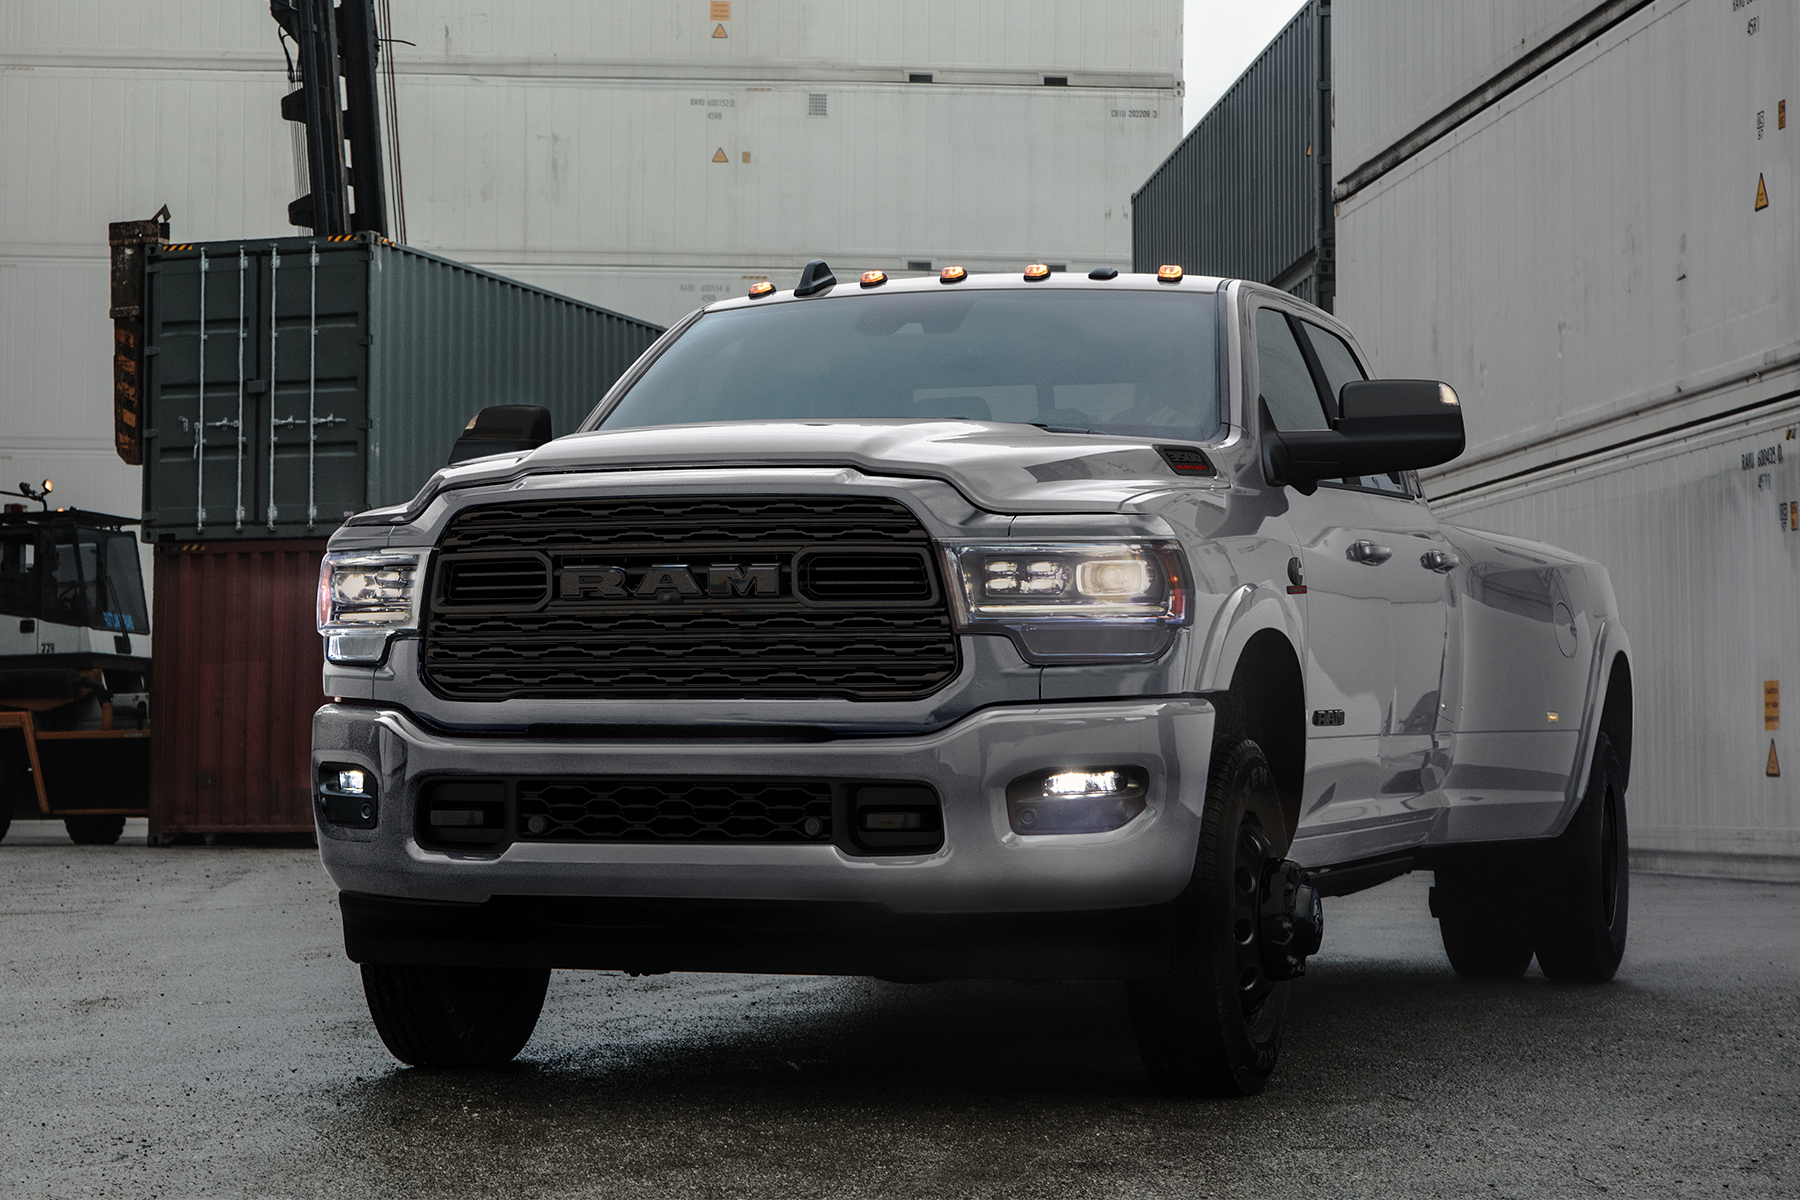 Ram Night HD Limited Edition Billet Silver Retouched